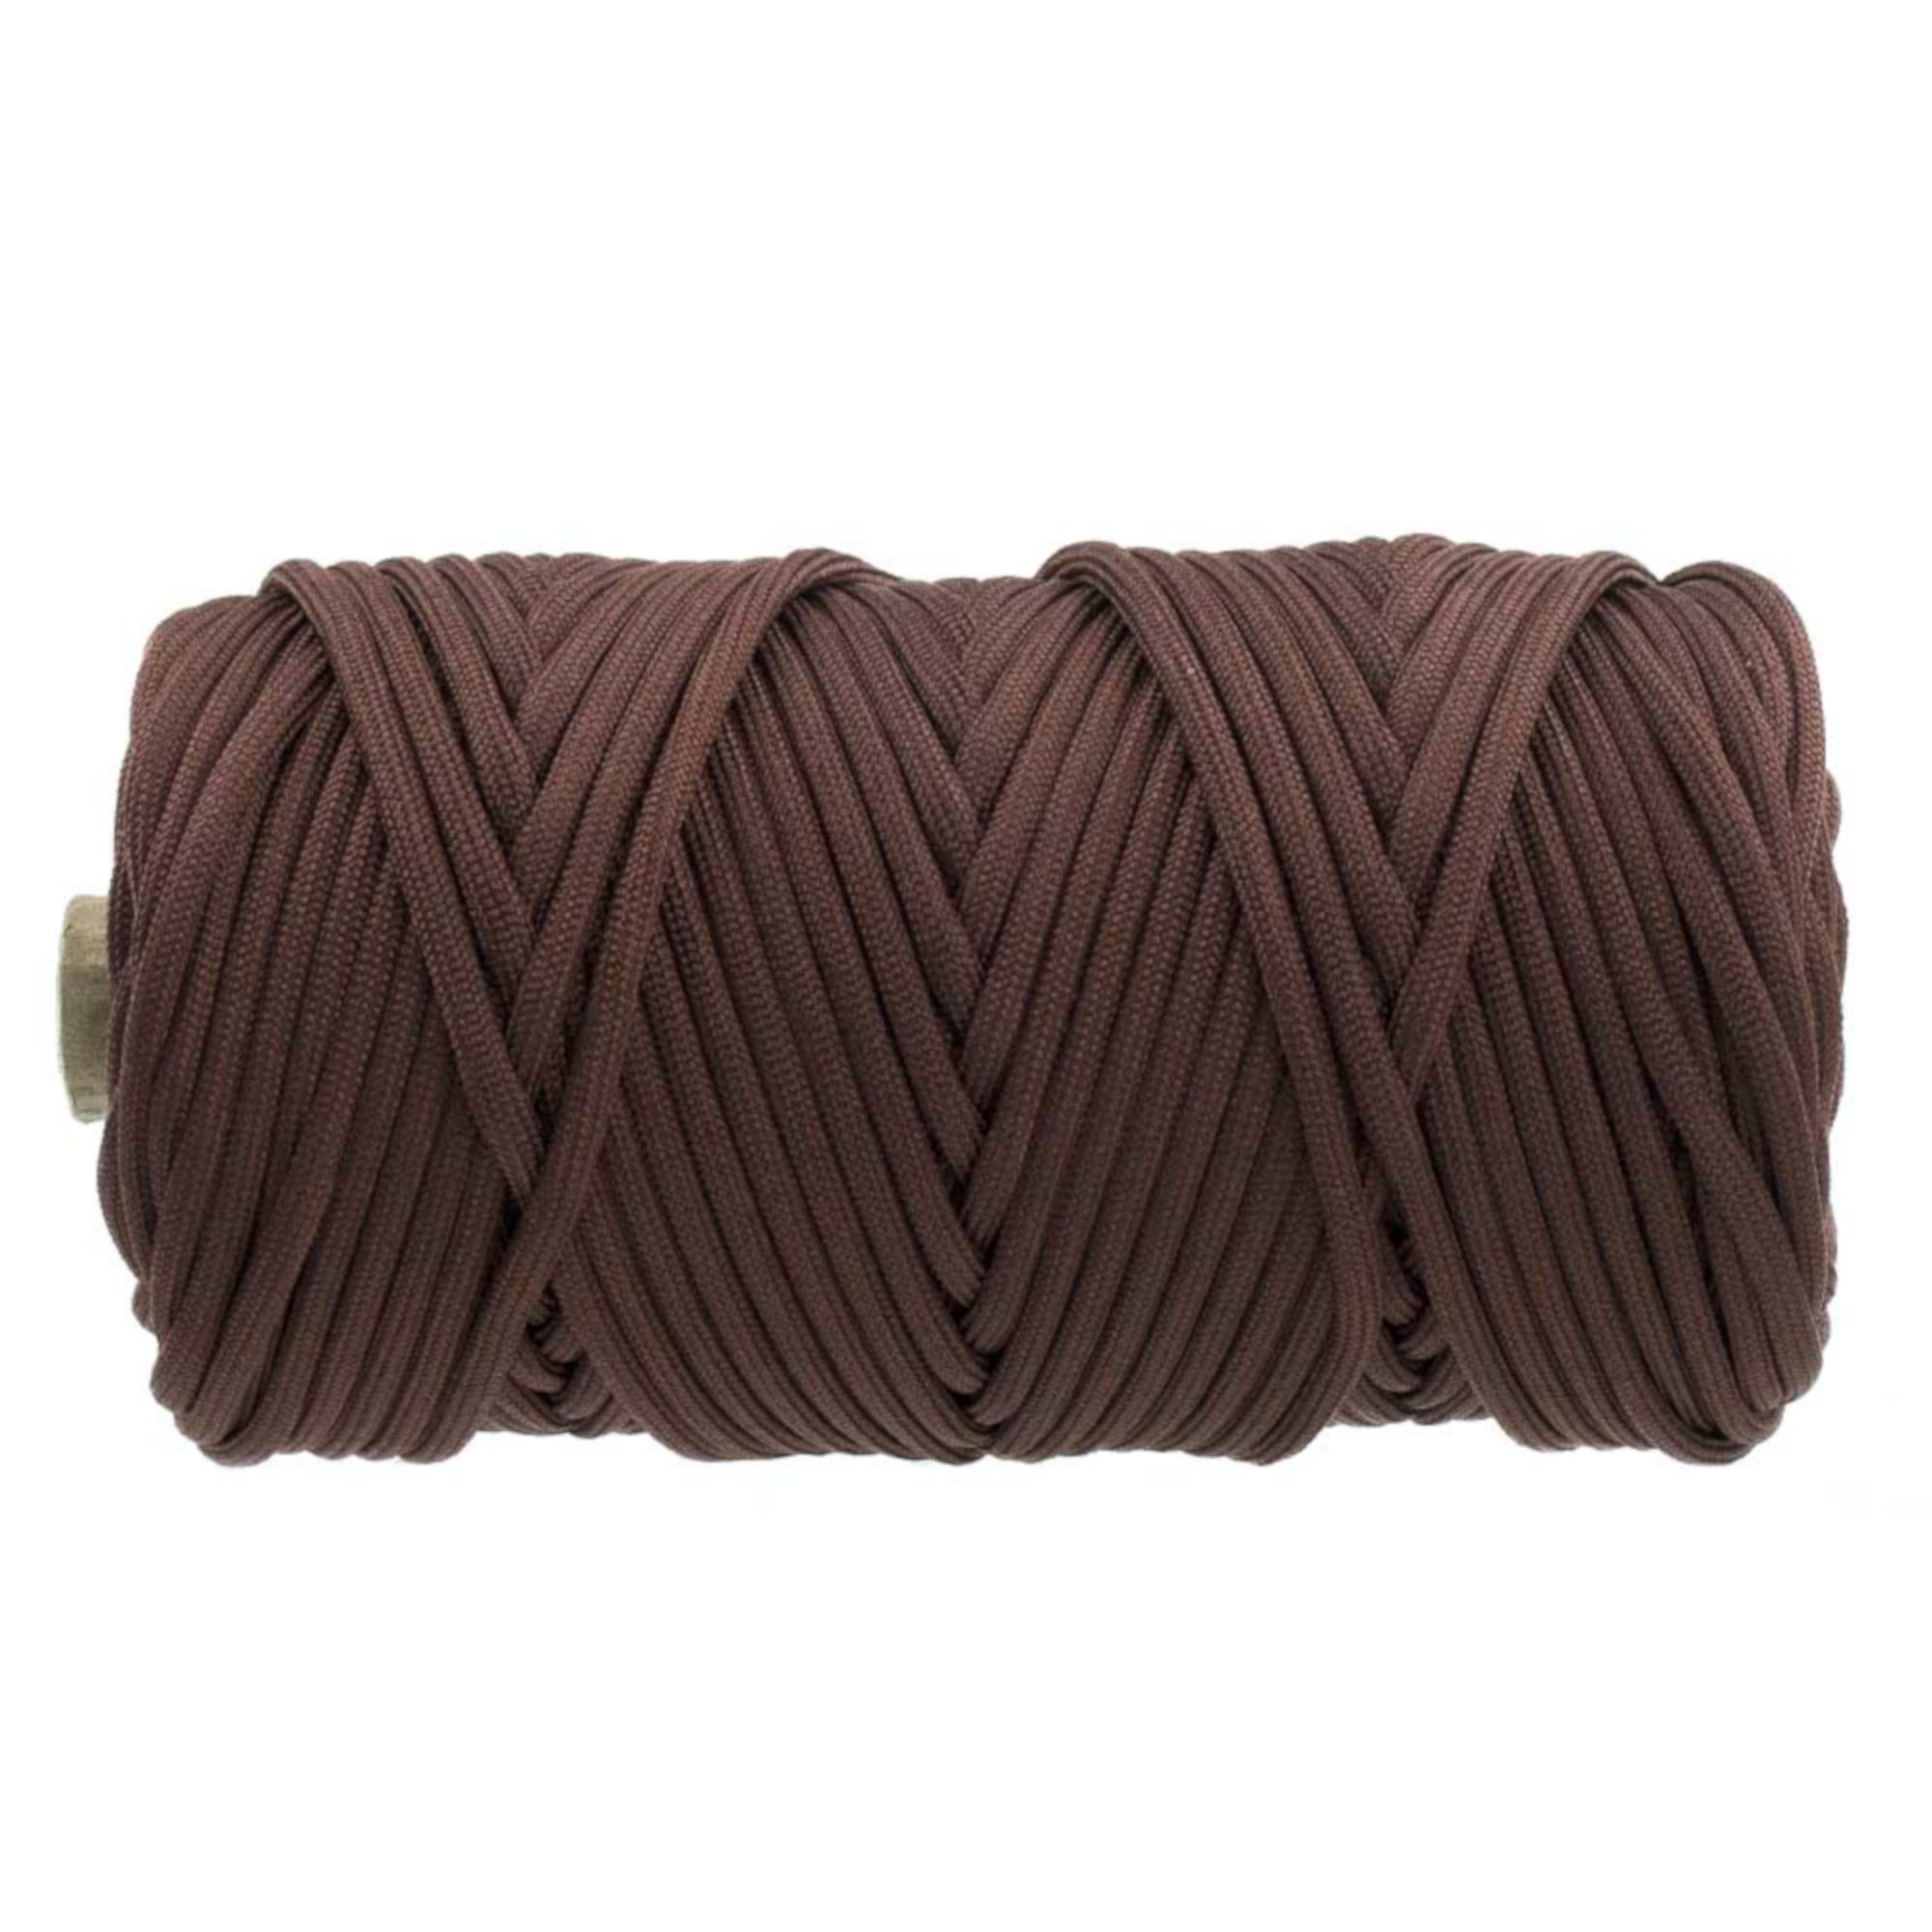  Guaranteed U.S  Type III 550 Military Survival Cord for Bracelets & Projects 1/8 diameter Made 550 Lb Break Strength 7 Internal Strands Paracord / Parachute Cord Includes 2 EBooks. 